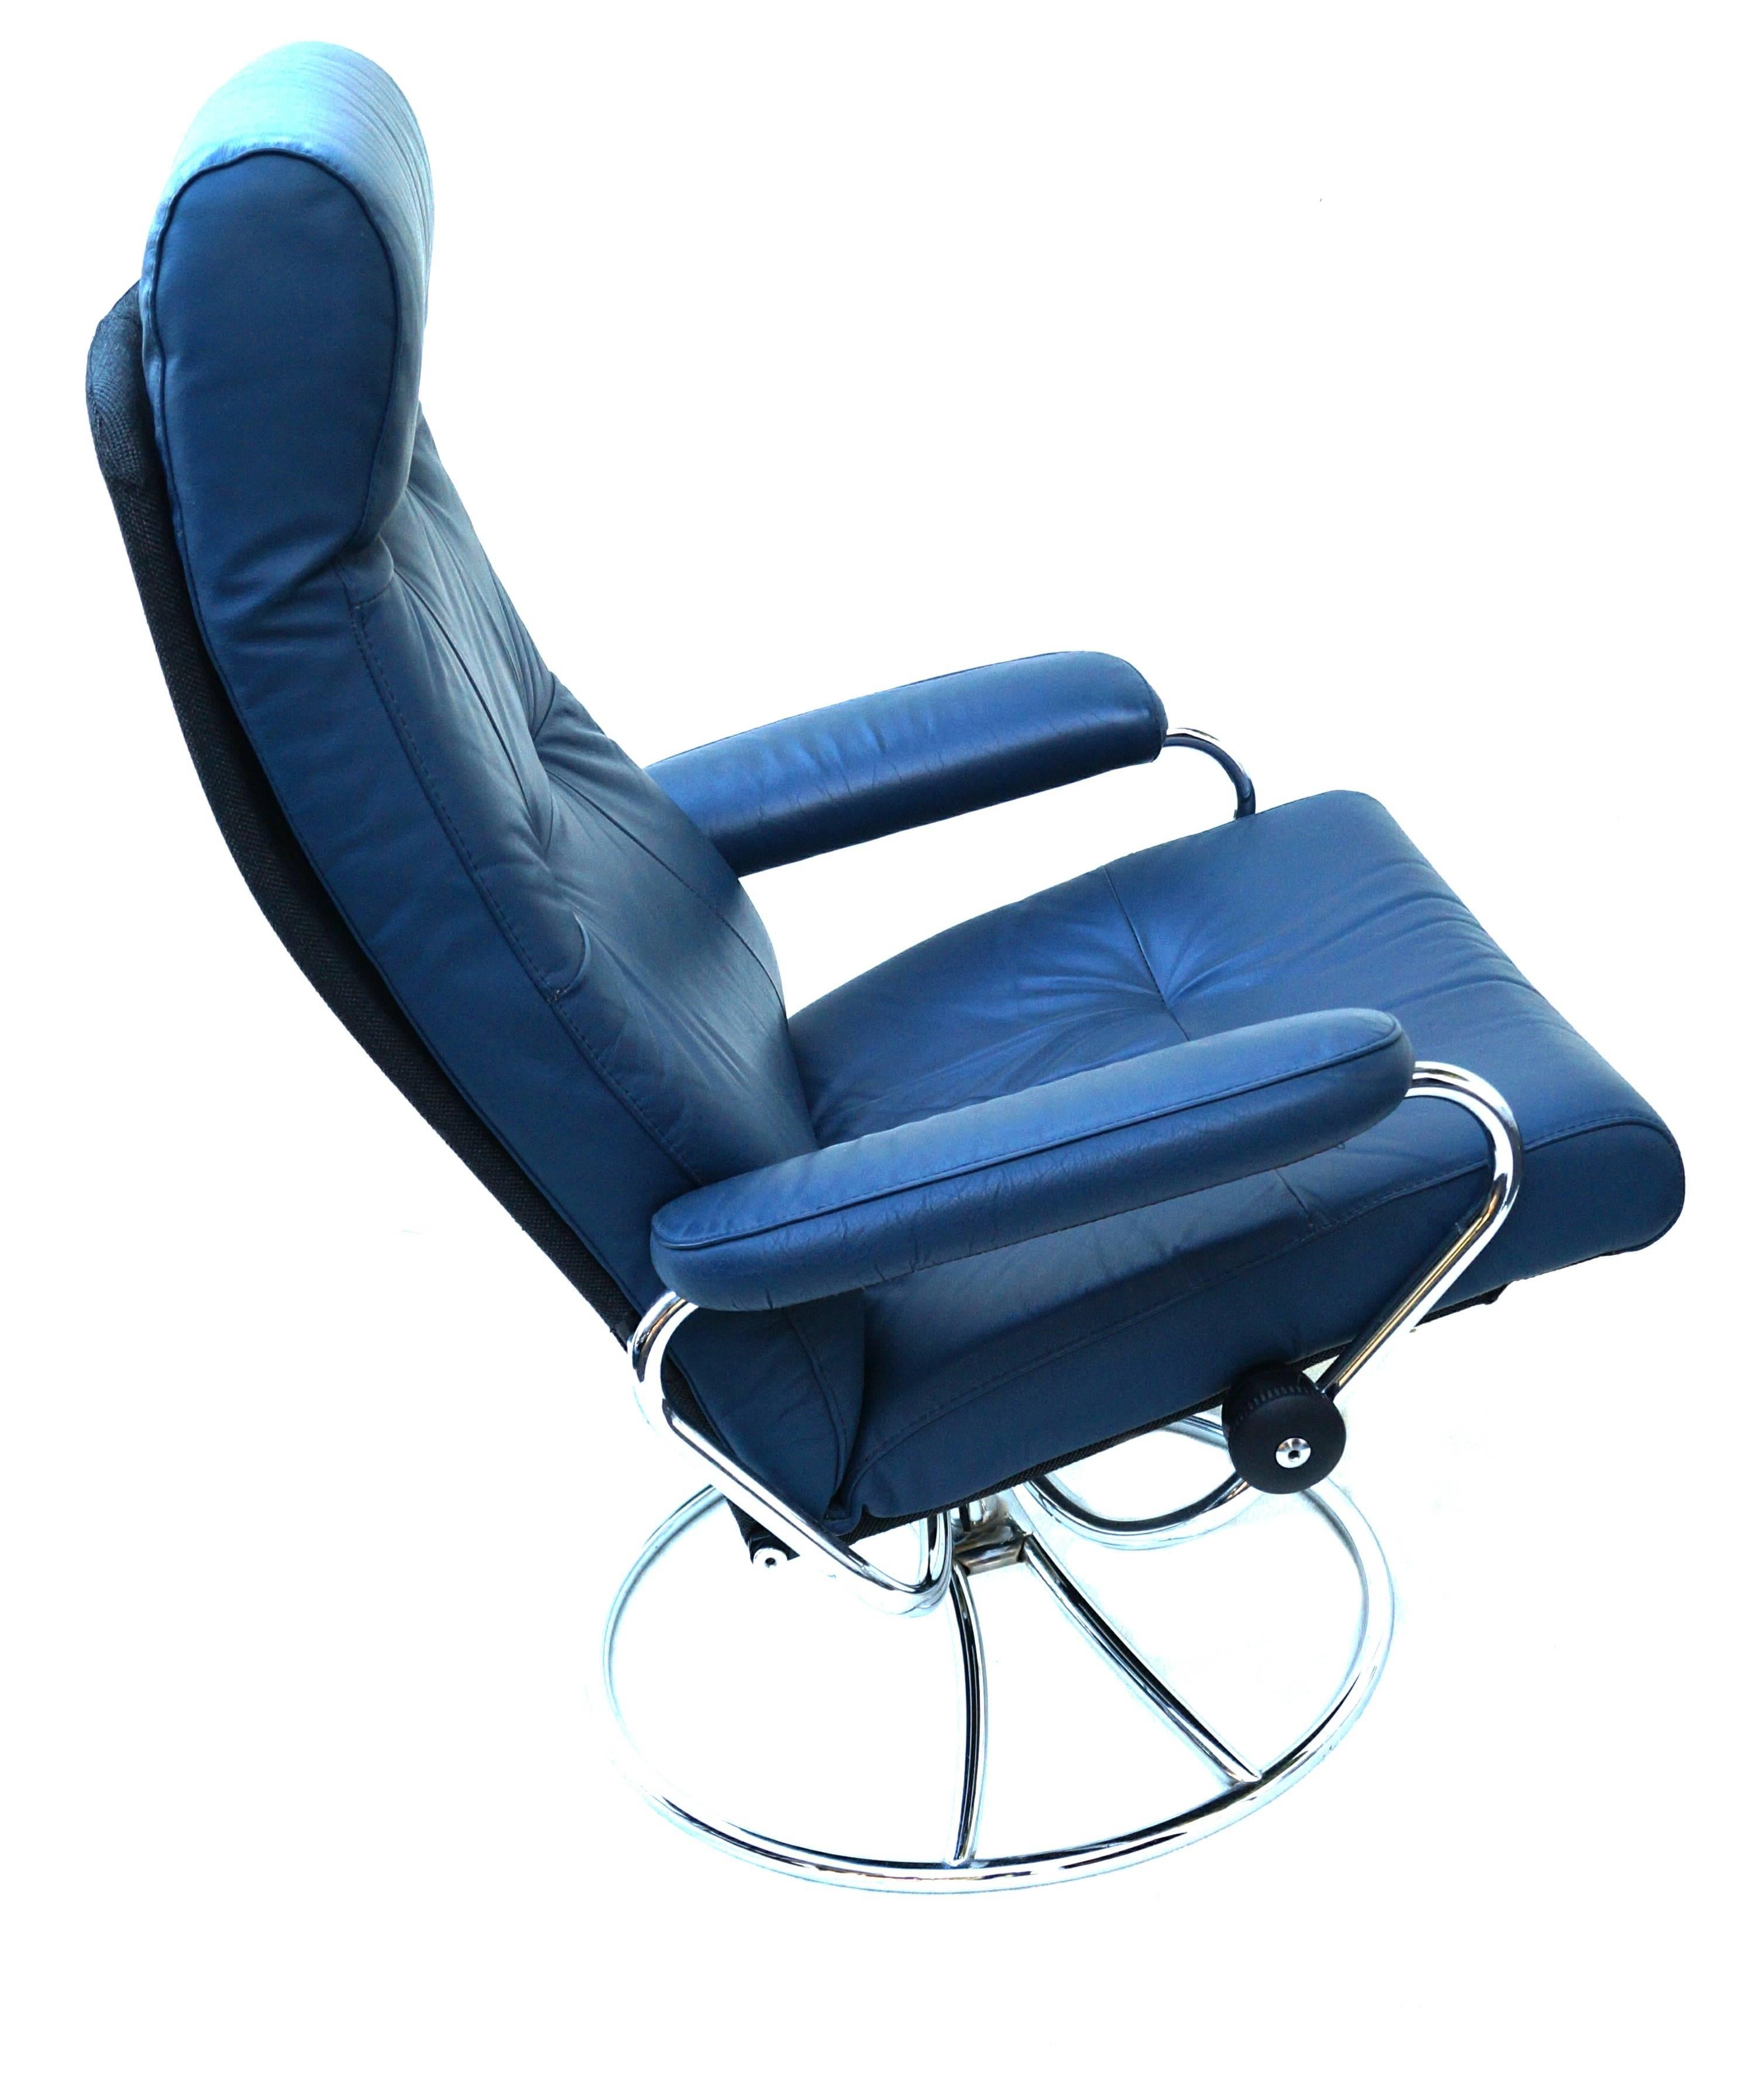 Late 20th Century Ekornes Norwegian Blue Leather Lounge Chair and Ottoman